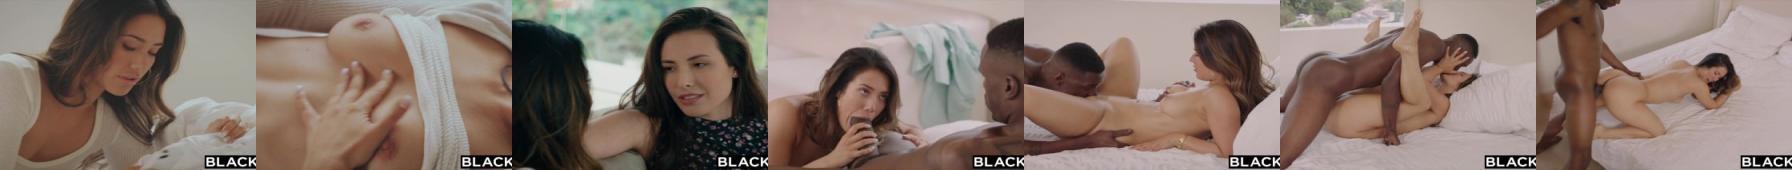 BLACKED Eva Lovia Catches Up With A College Fling